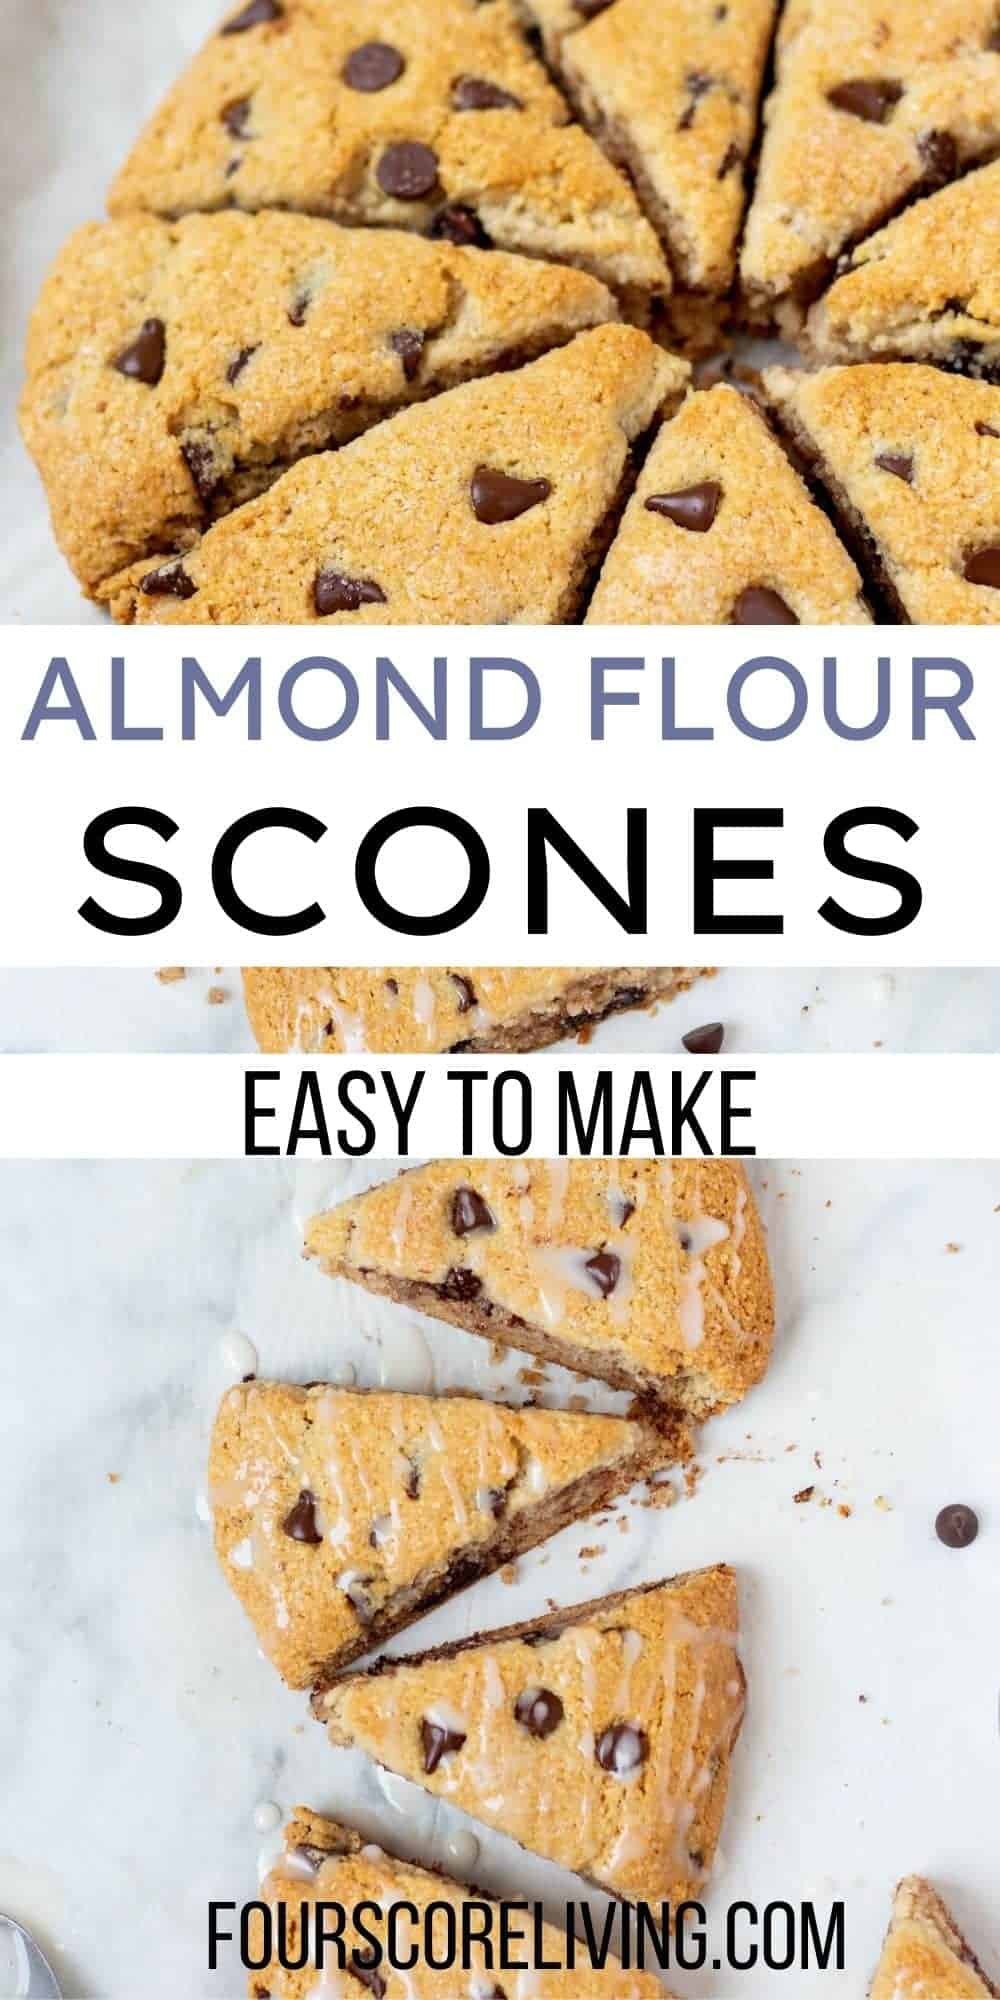 two photos of chocolate chip scones made with almond flour. Text over image says "almond flour scones. Easy to make."